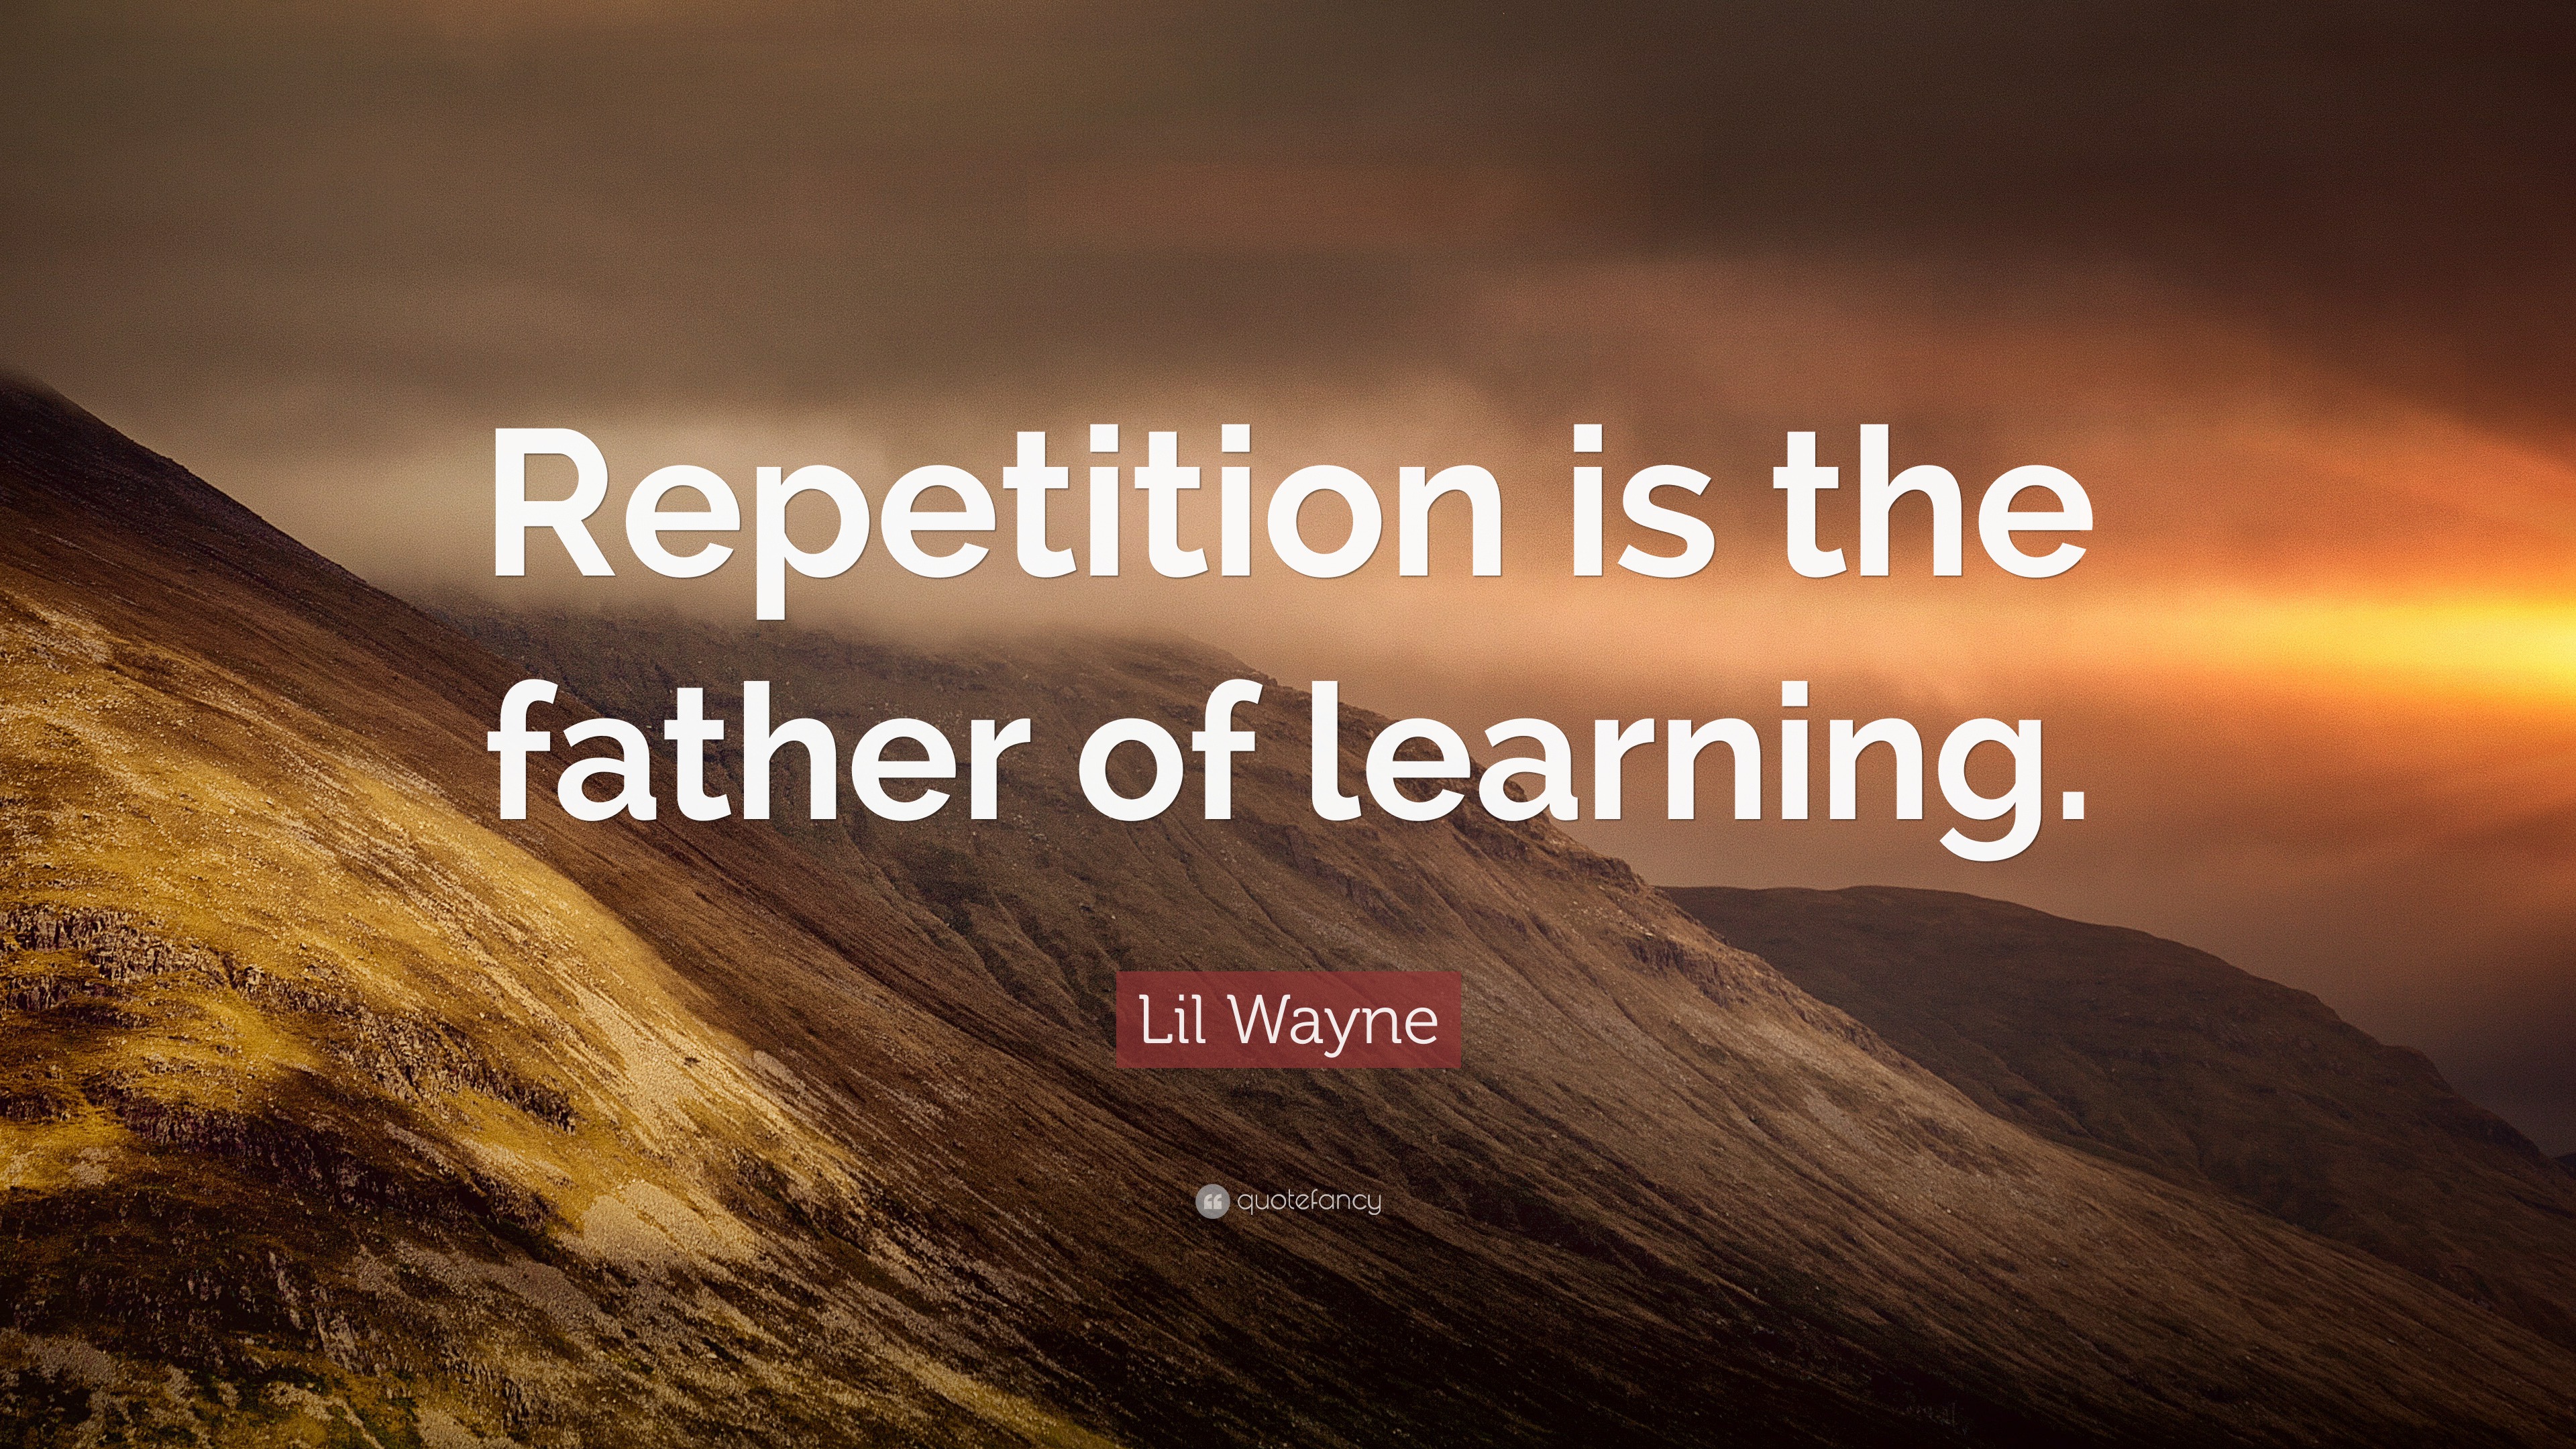 Lil Wayne Quote: "Repetition is the father of learning." (12 wallpapers) - Quotefancy